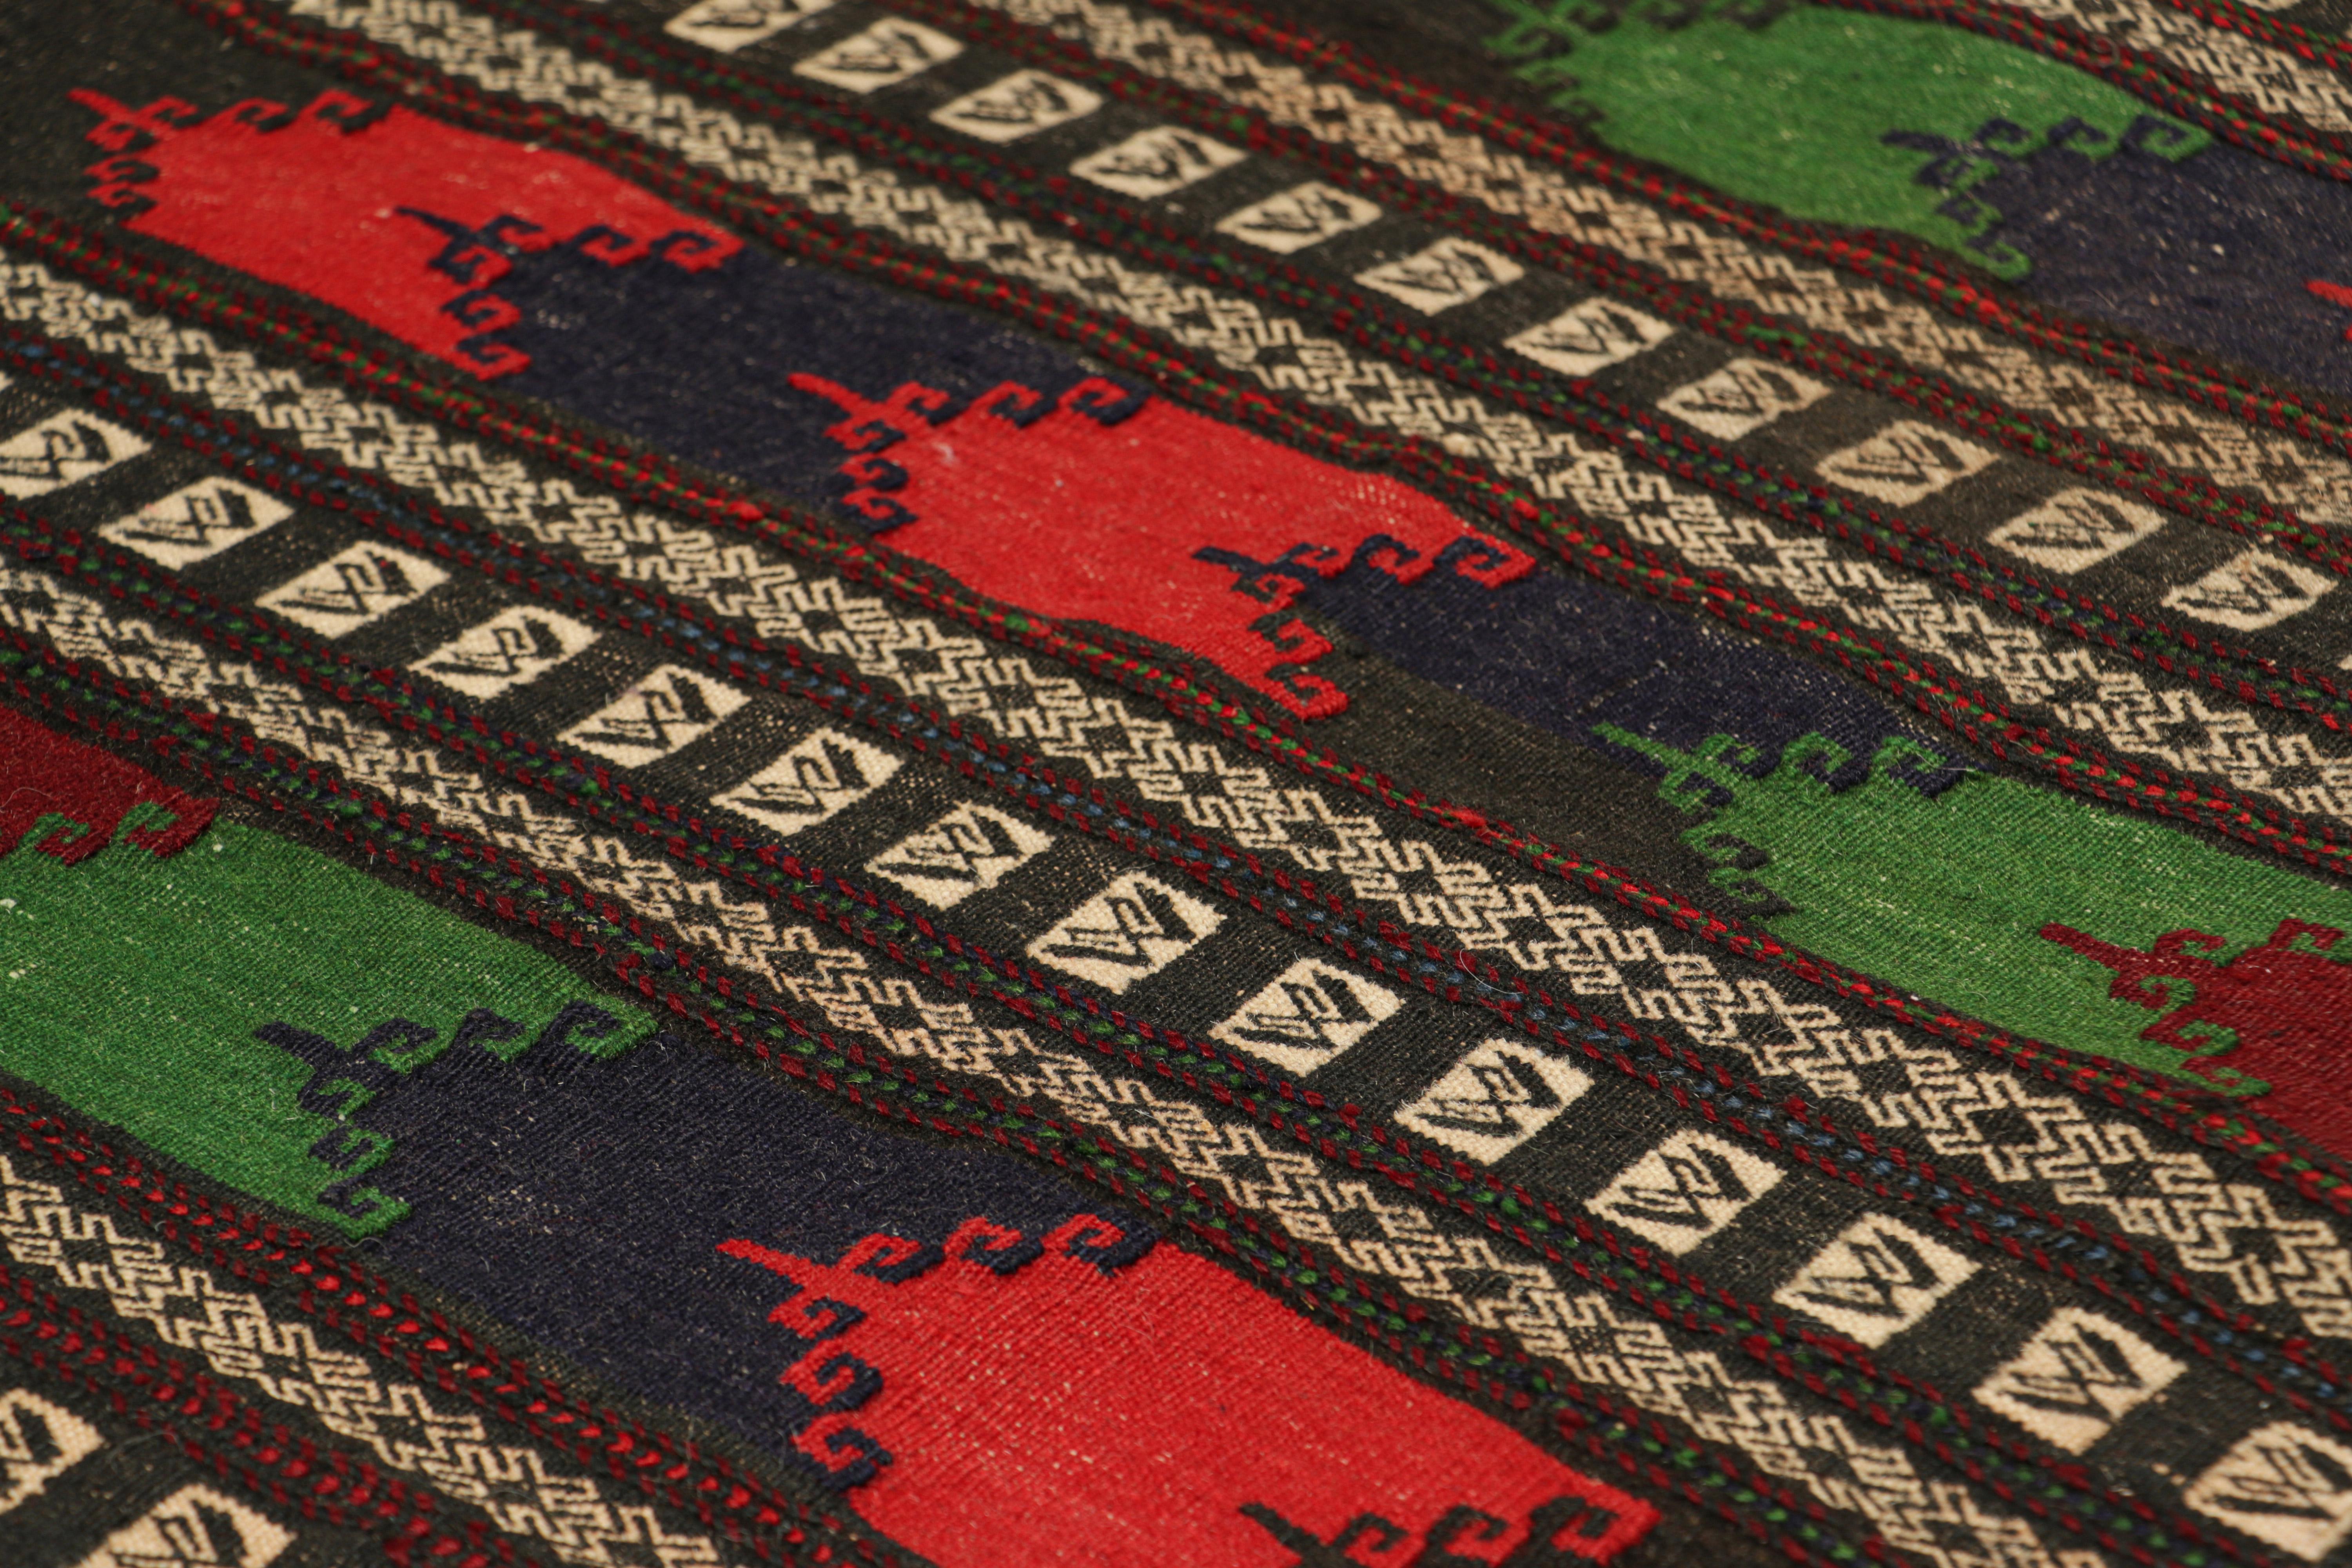 Tribal Vintage Afghan Kilim, with Polychromatic Striped Patterns from Rug & Kilim For Sale